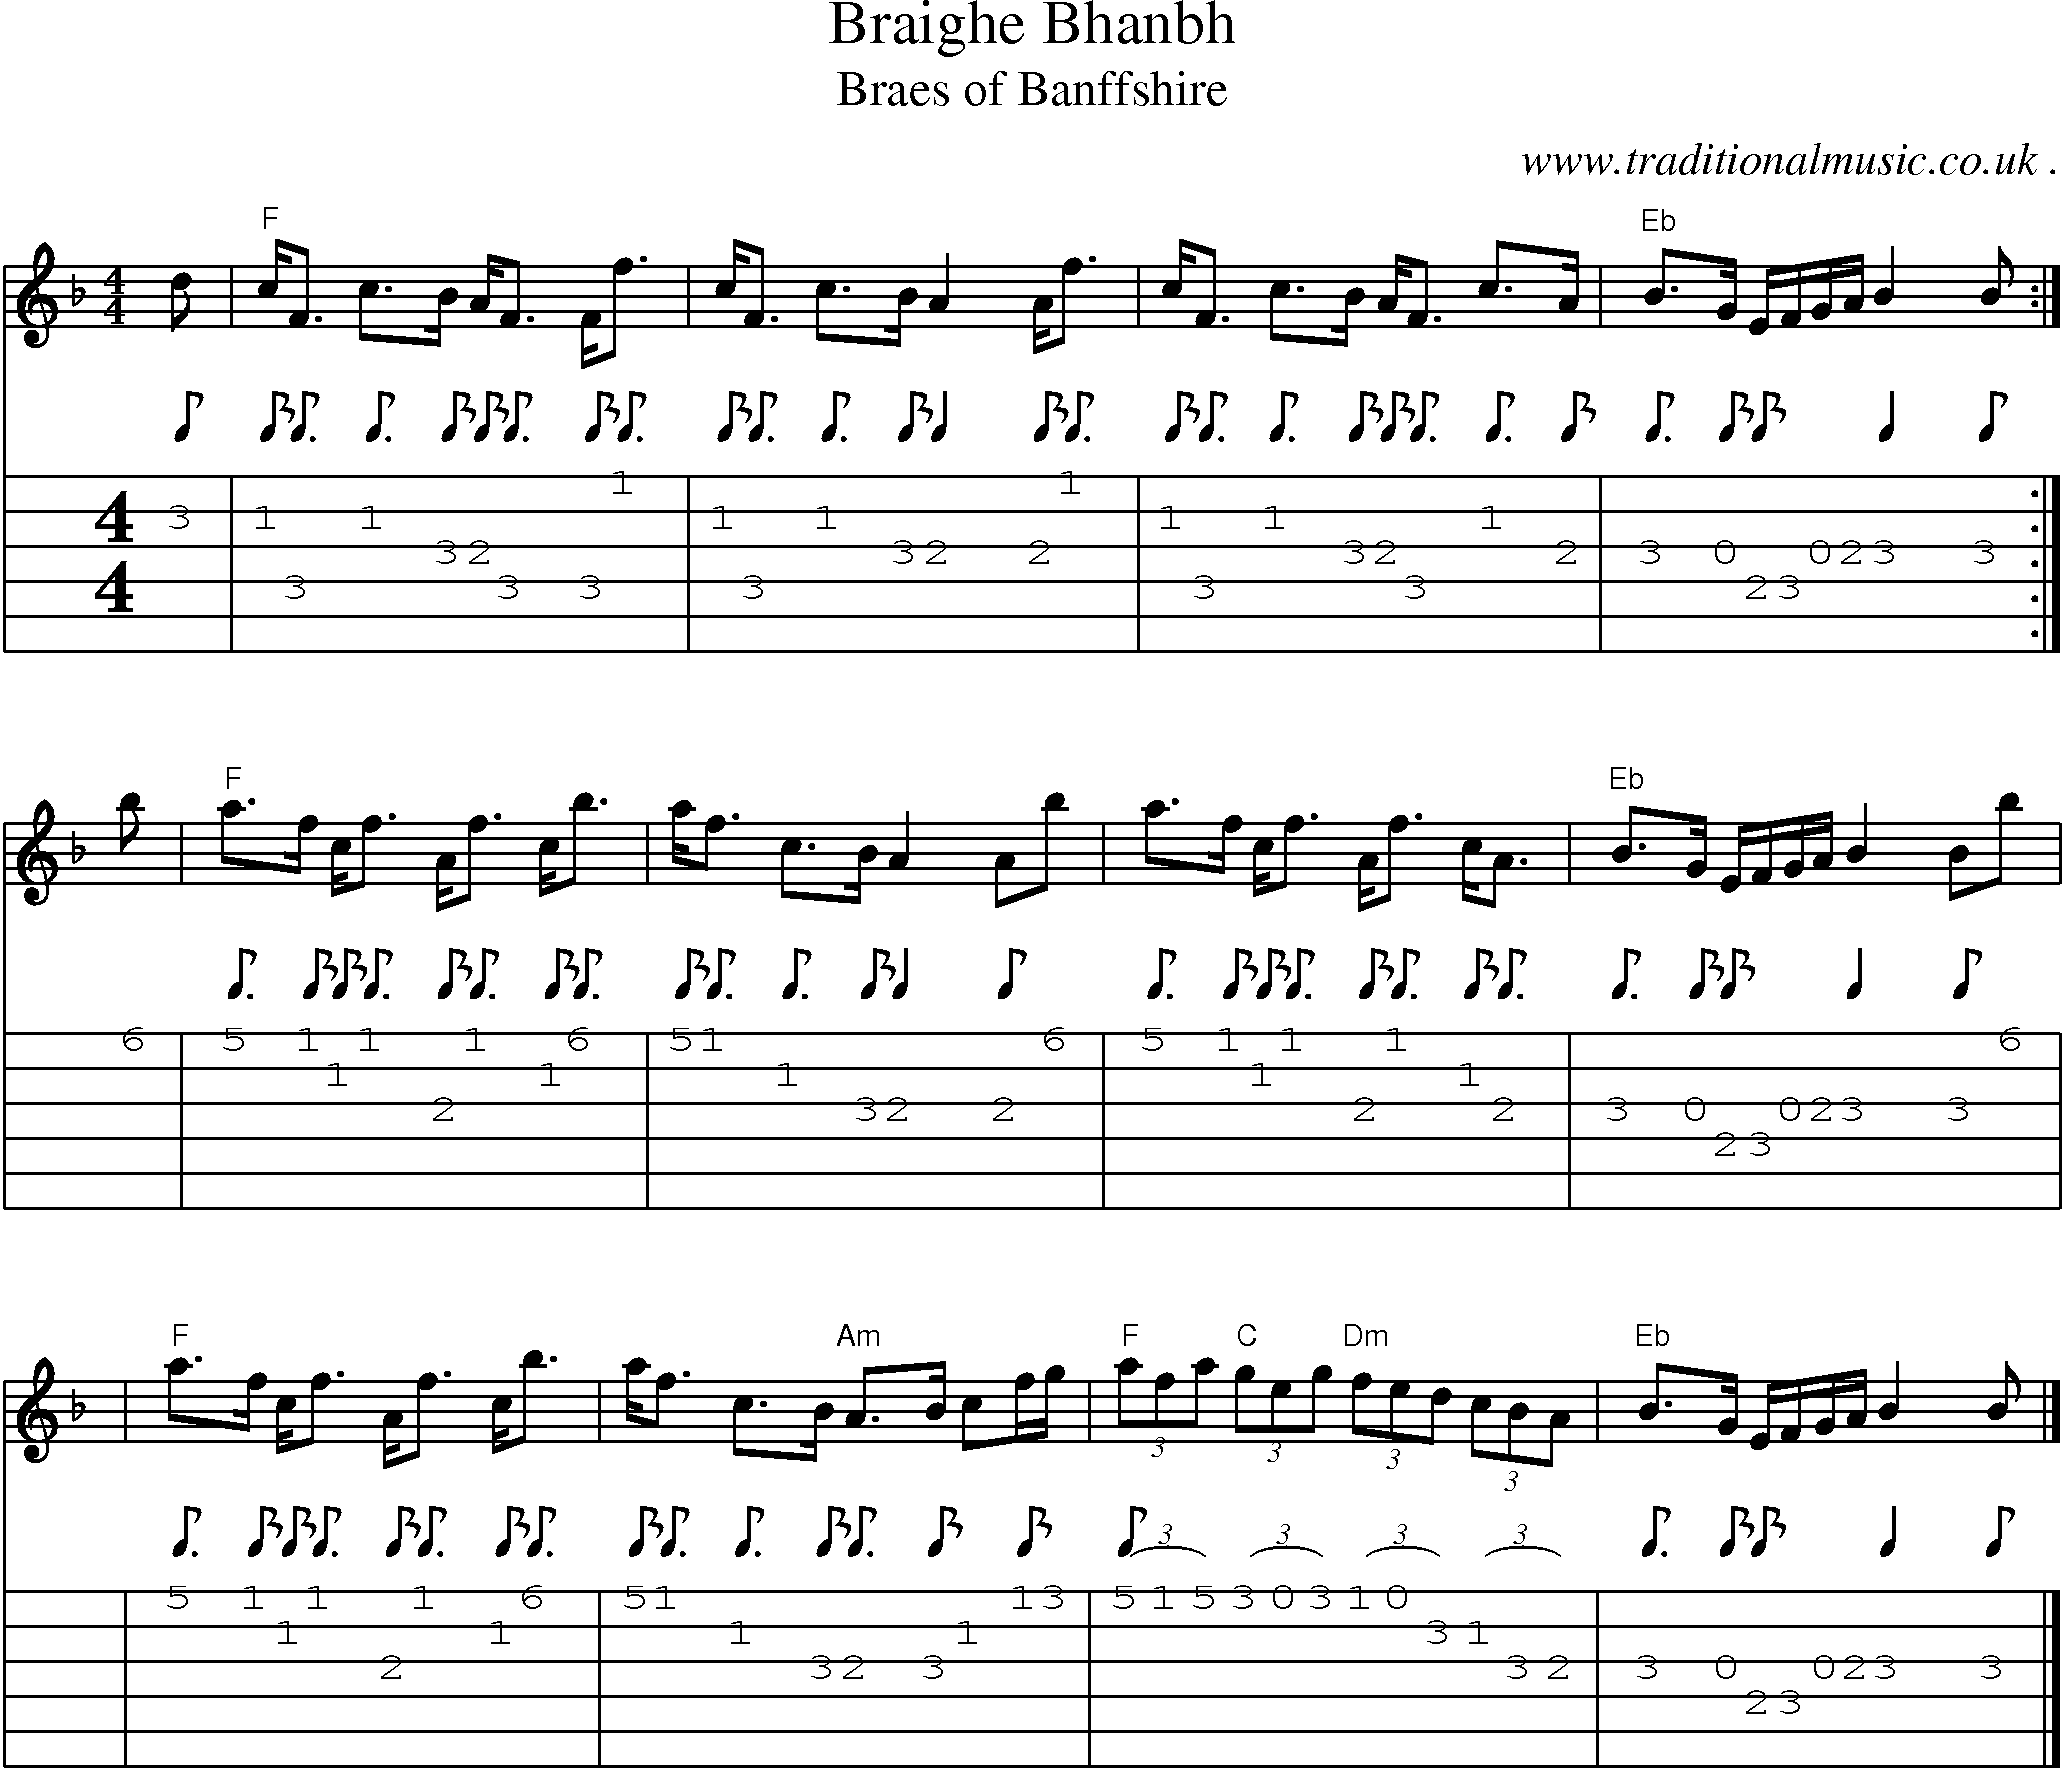 Sheet-music  score, Chords and Guitar Tabs for Braighe Bhanbh